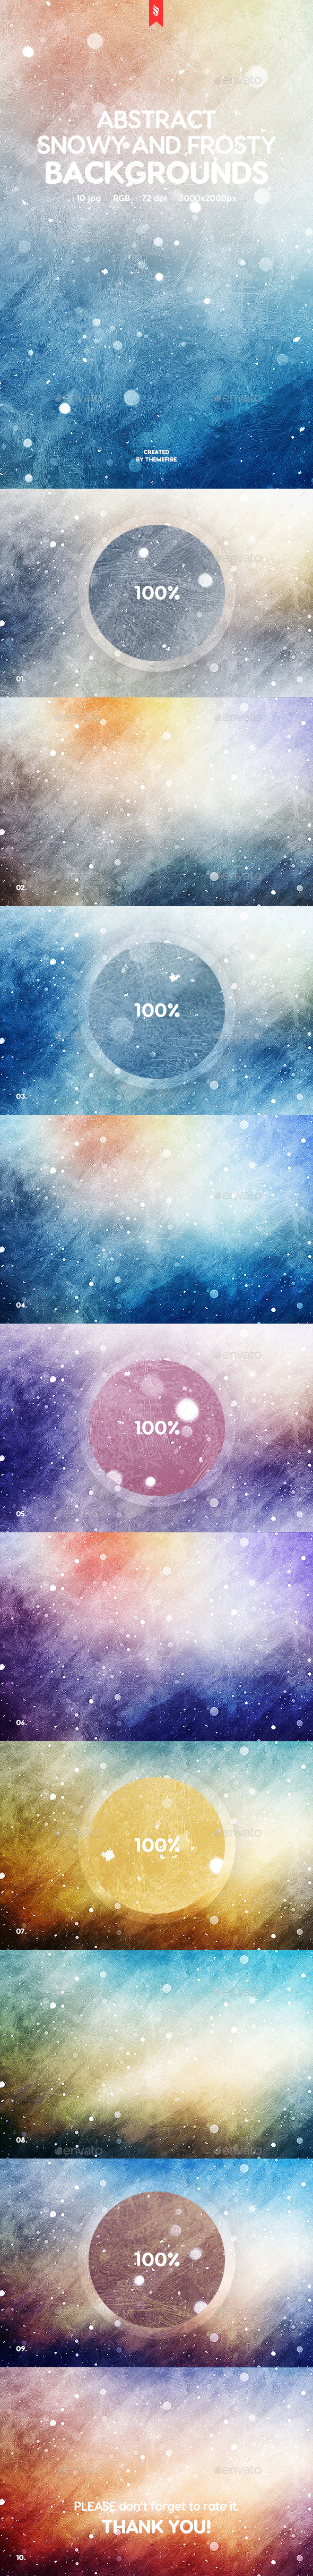 Snowy and Frosty Backgrounds